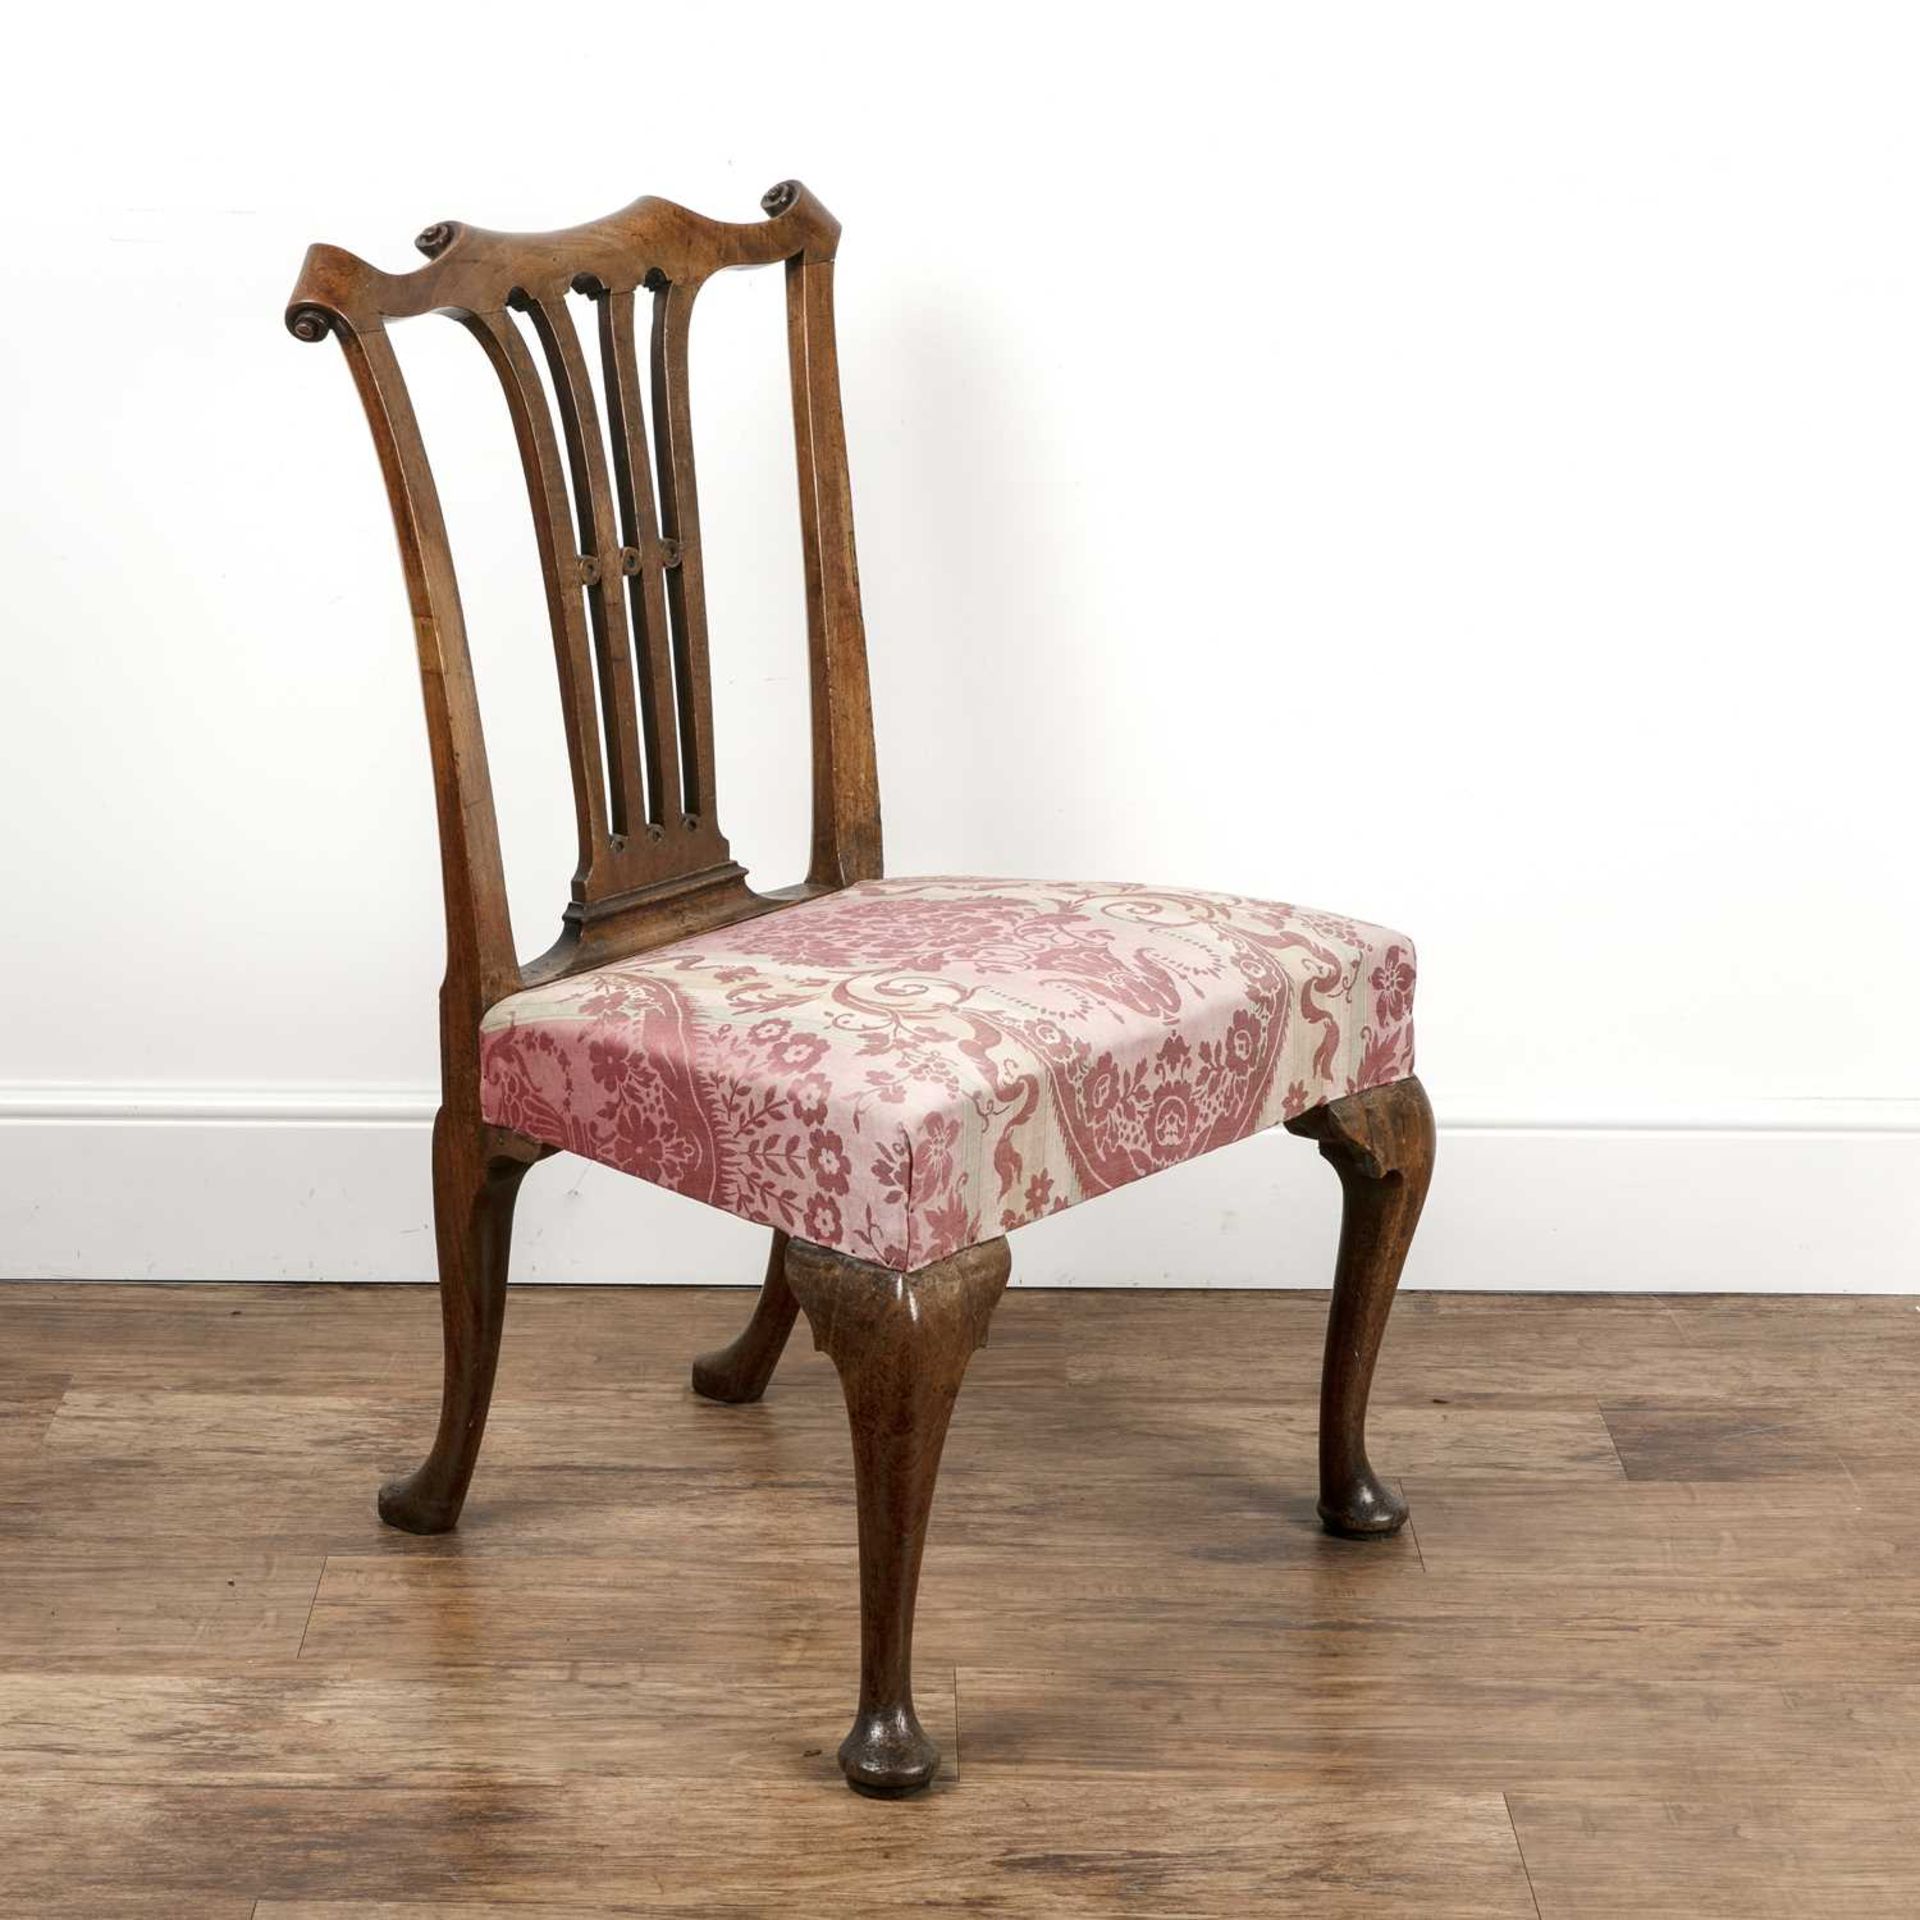 Mahogany side chair 18th Century, with a splat back and reupholstered seat, 60cm wide x 97cm high - Bild 2 aus 4